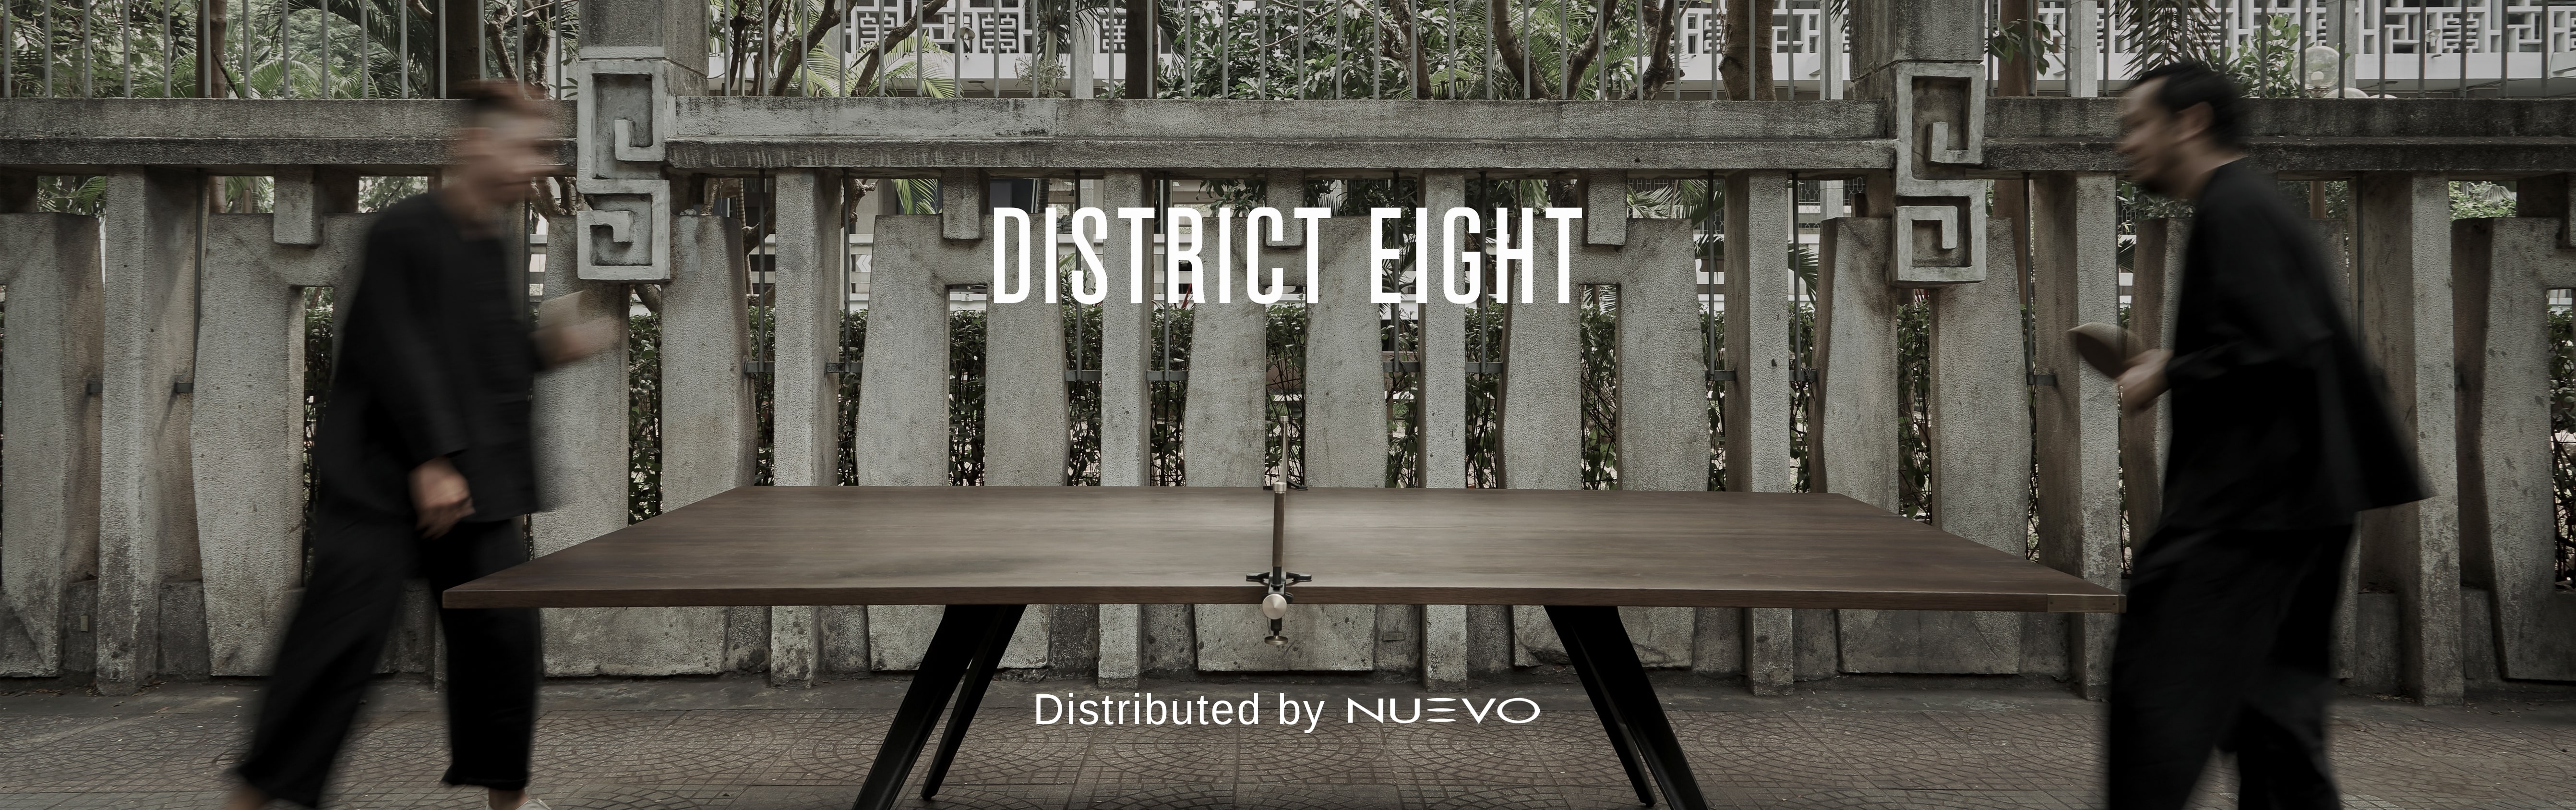 District Eight